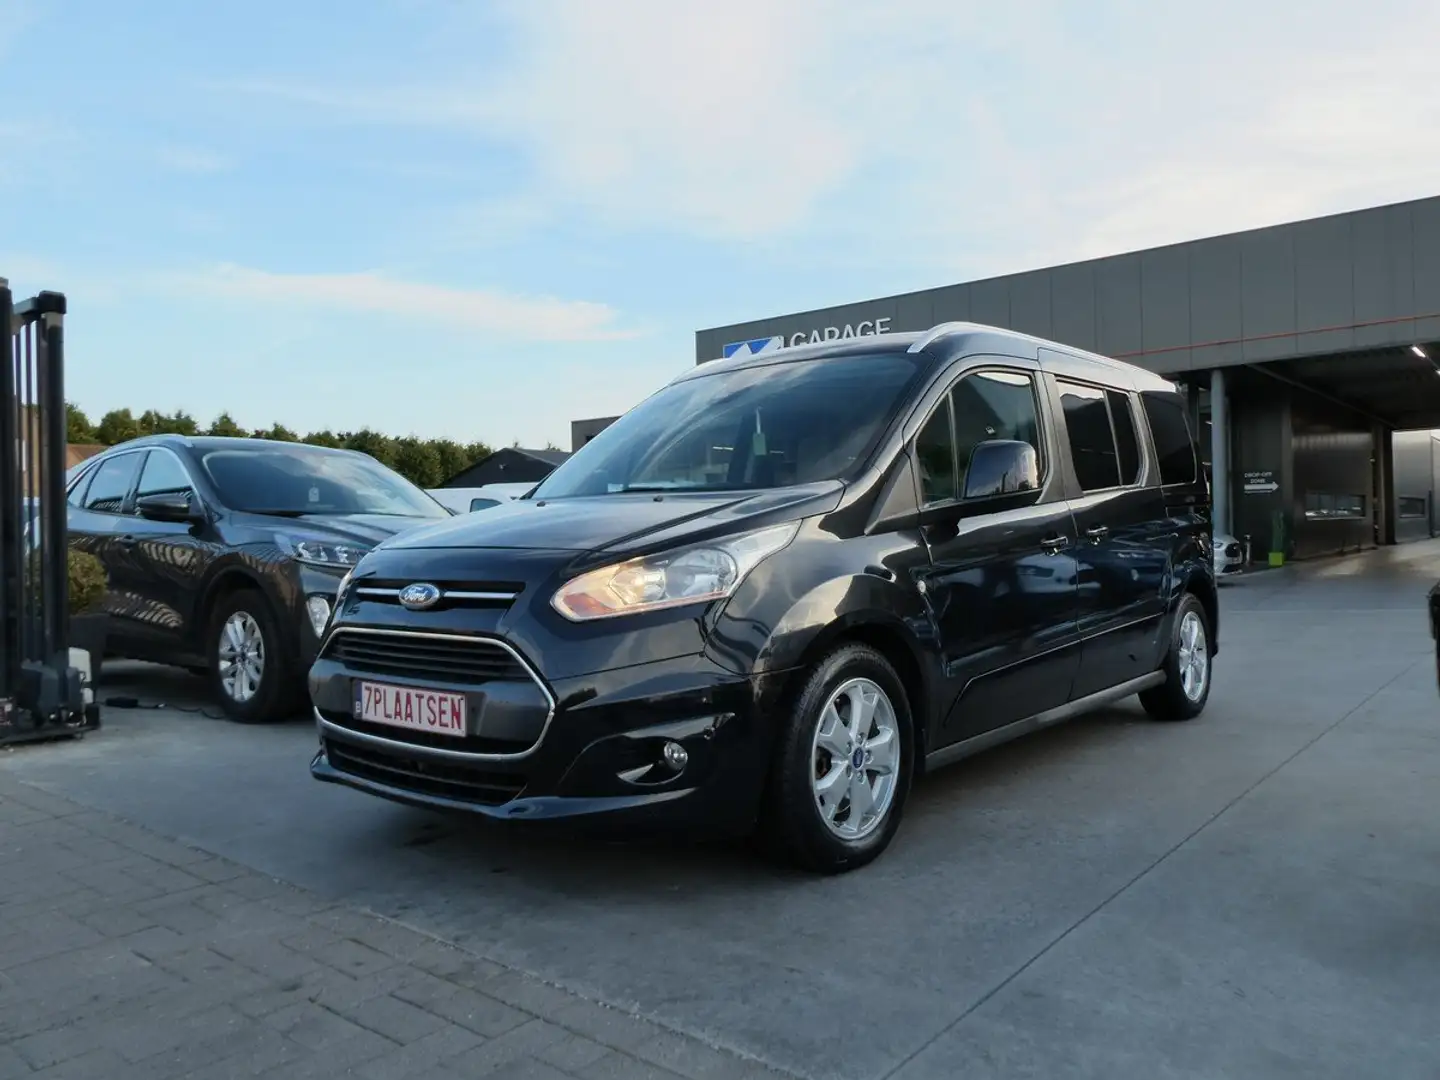 Ford Tourneo Connect L2 1.6 TDCi 115pk 7pl LIMITED Luxe '14 (23705) Black - 2